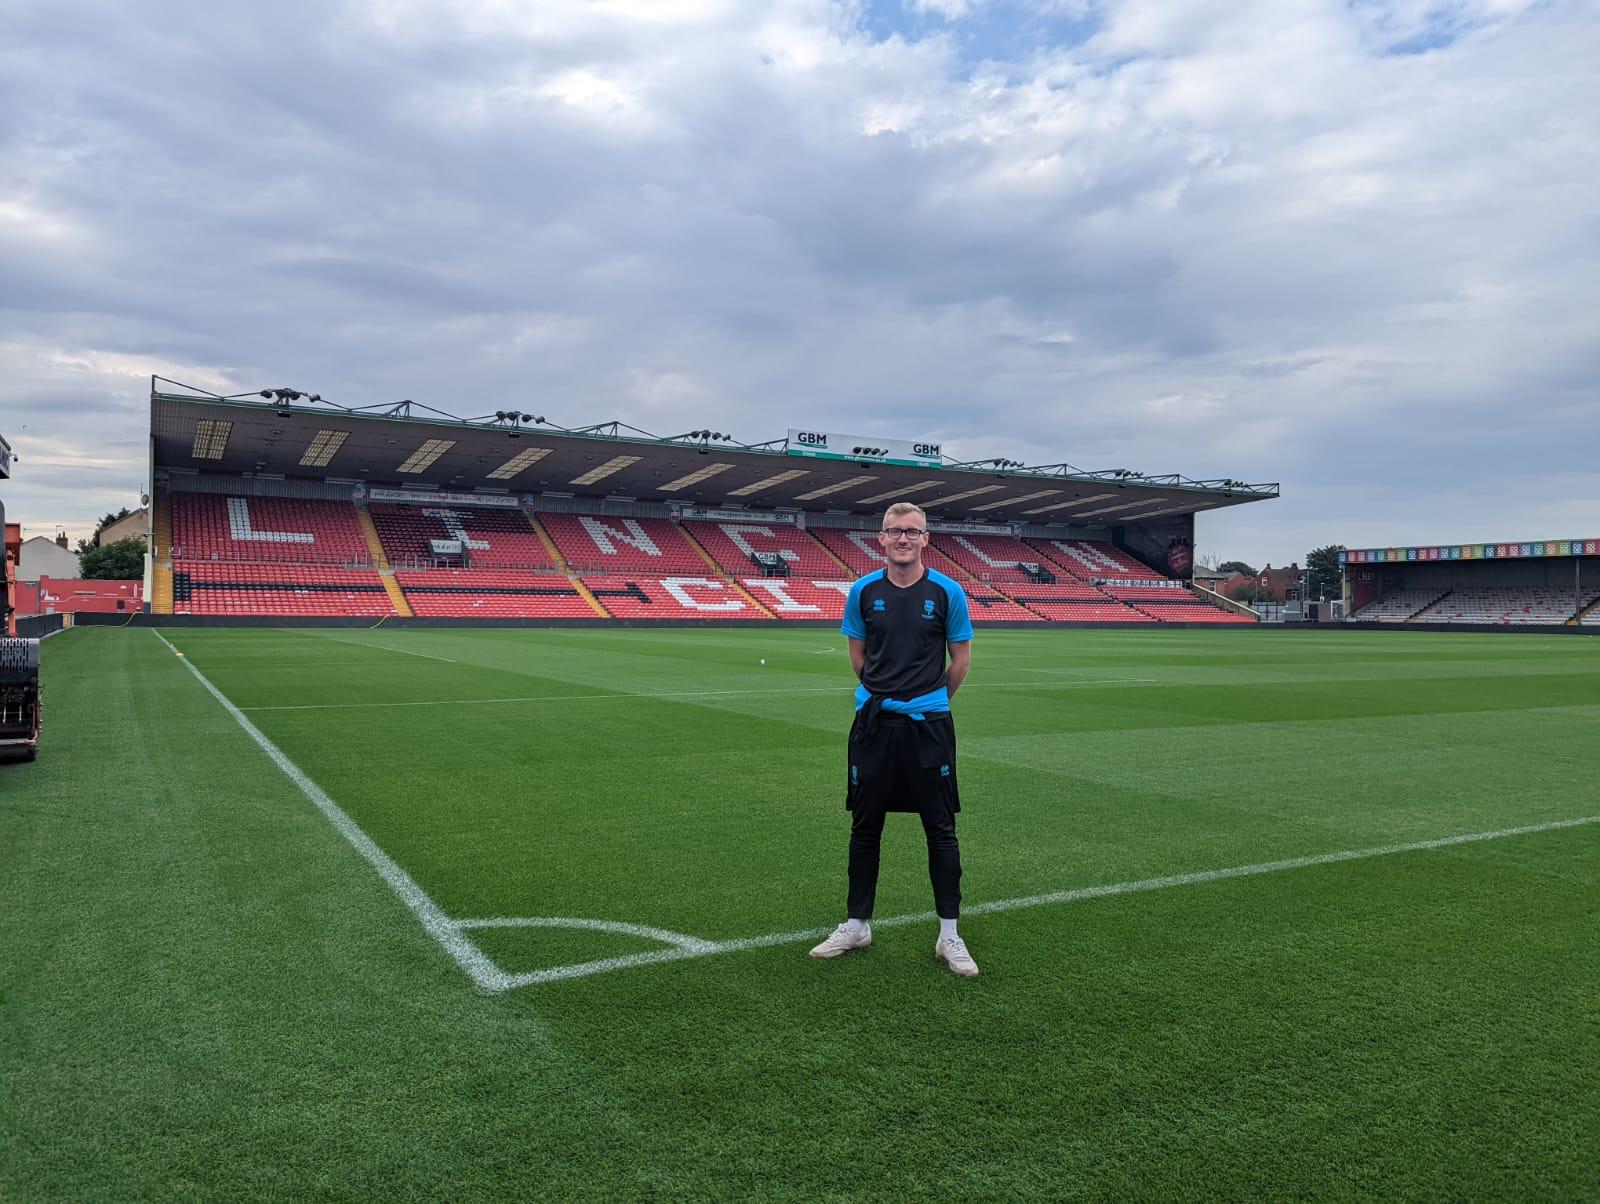 Brad Jeffreys from Lincoln City on the pitch